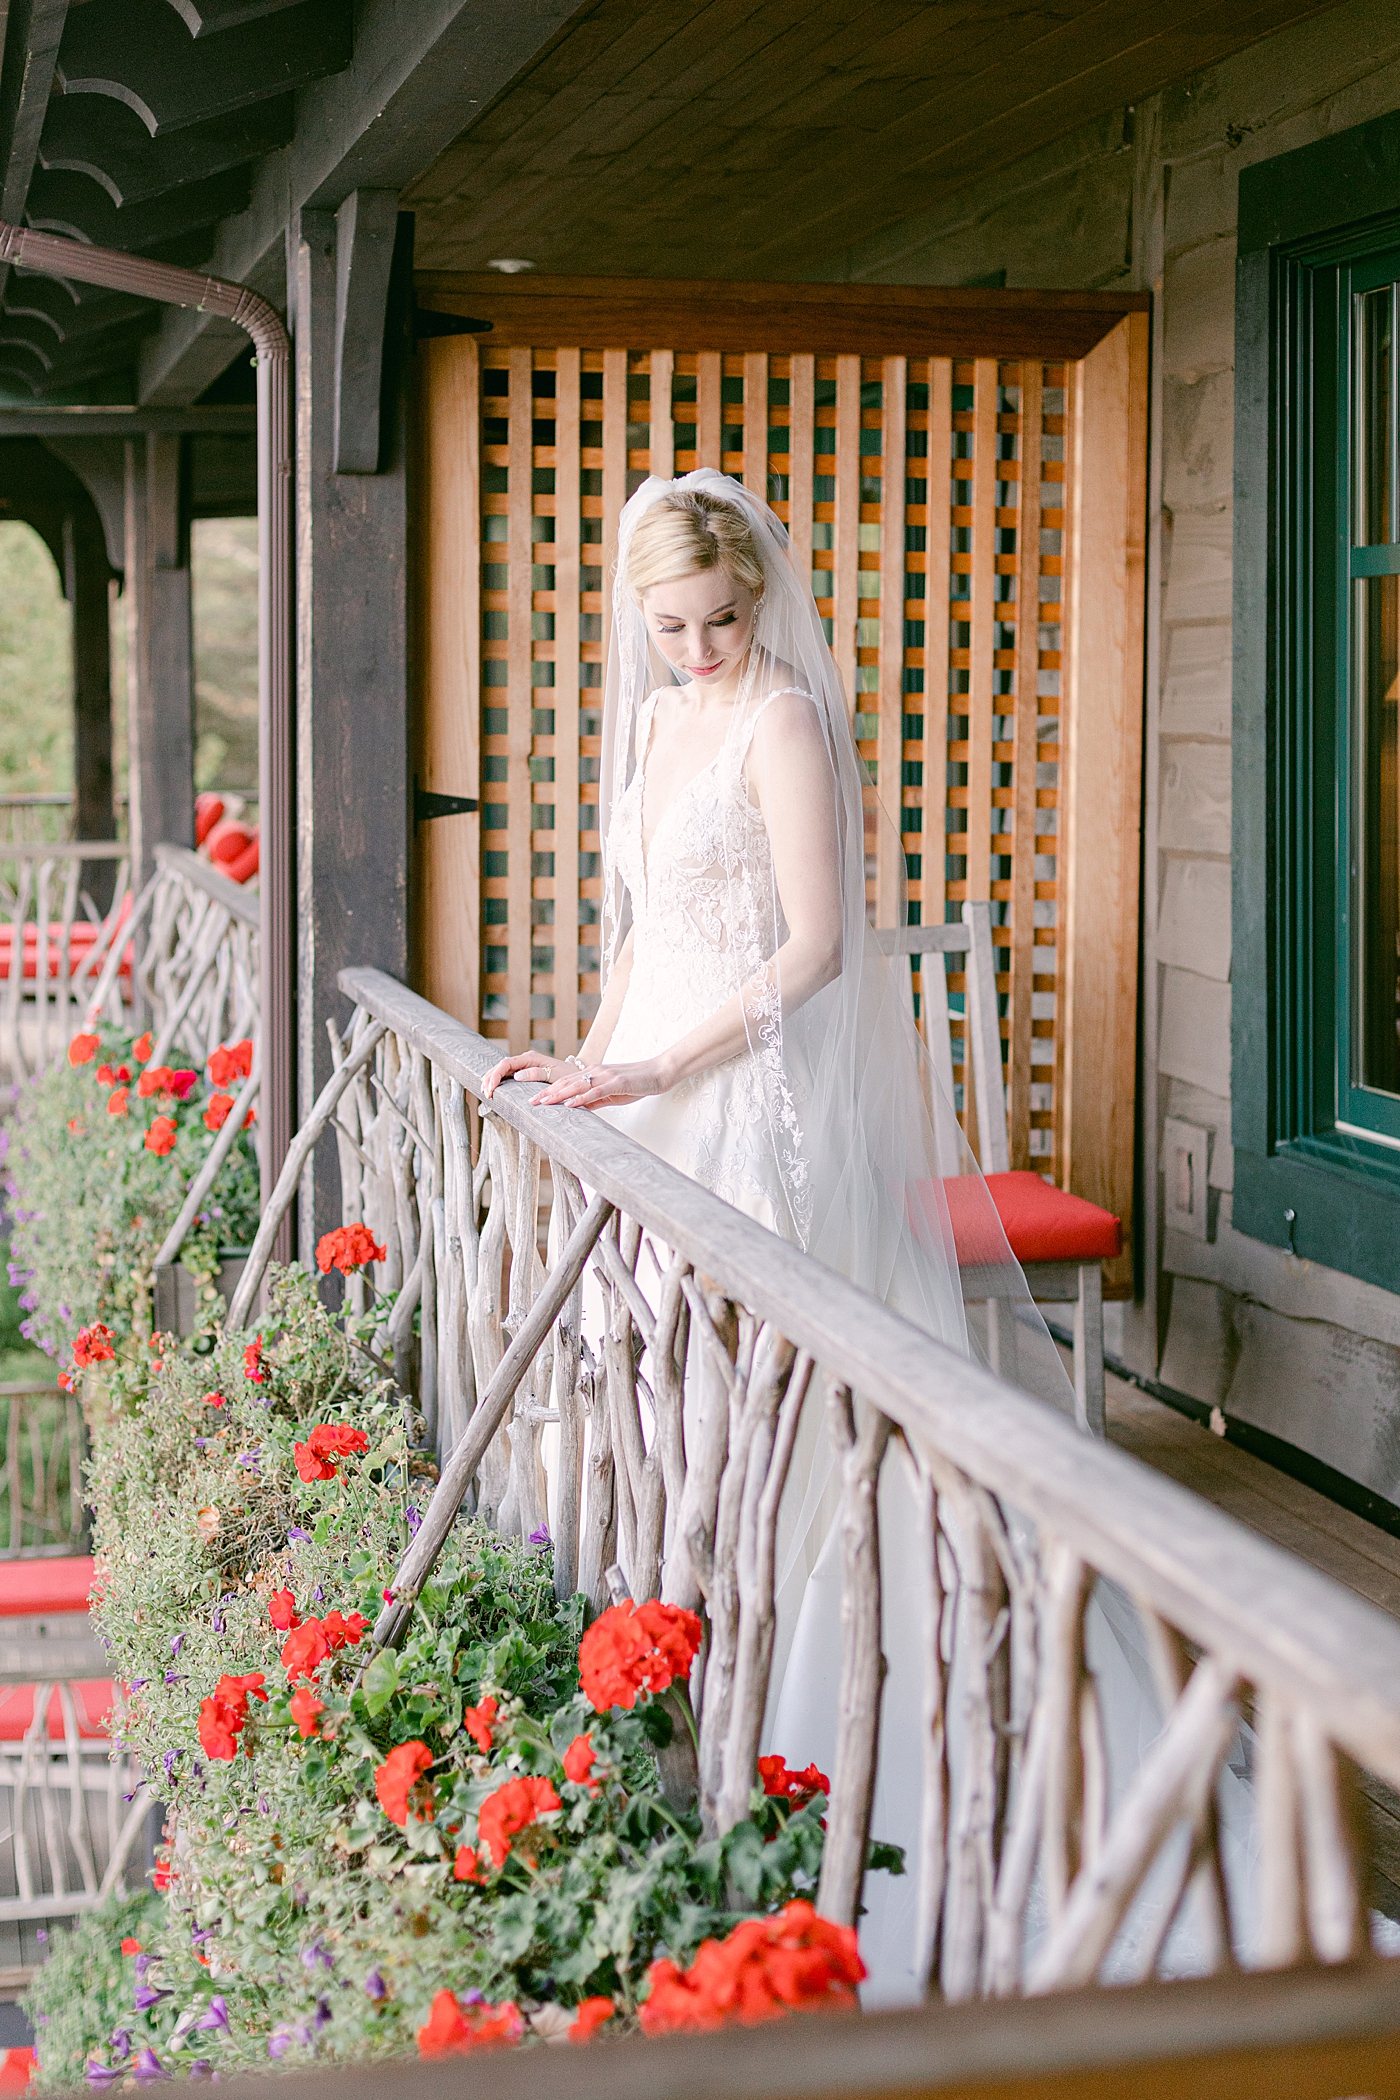 Bridal portraits on porch with red flowers | Image by Hope Helmuth Photography